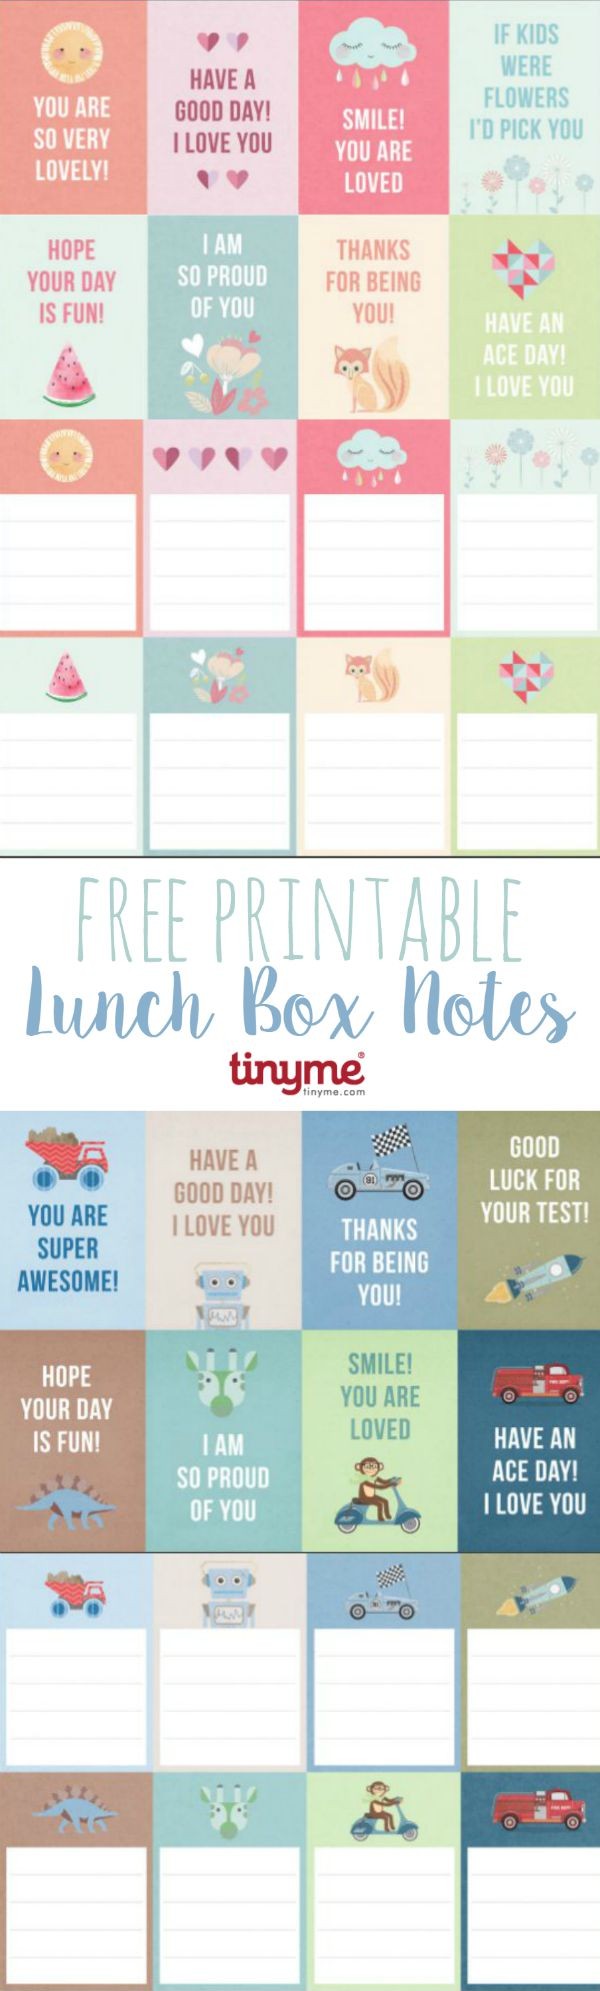 Free Printable Lunch Box Notes by tinyme.com for TodaysCreativeLife.com | Download your free printable lunch box notes. Send a sweet message to your kids! 